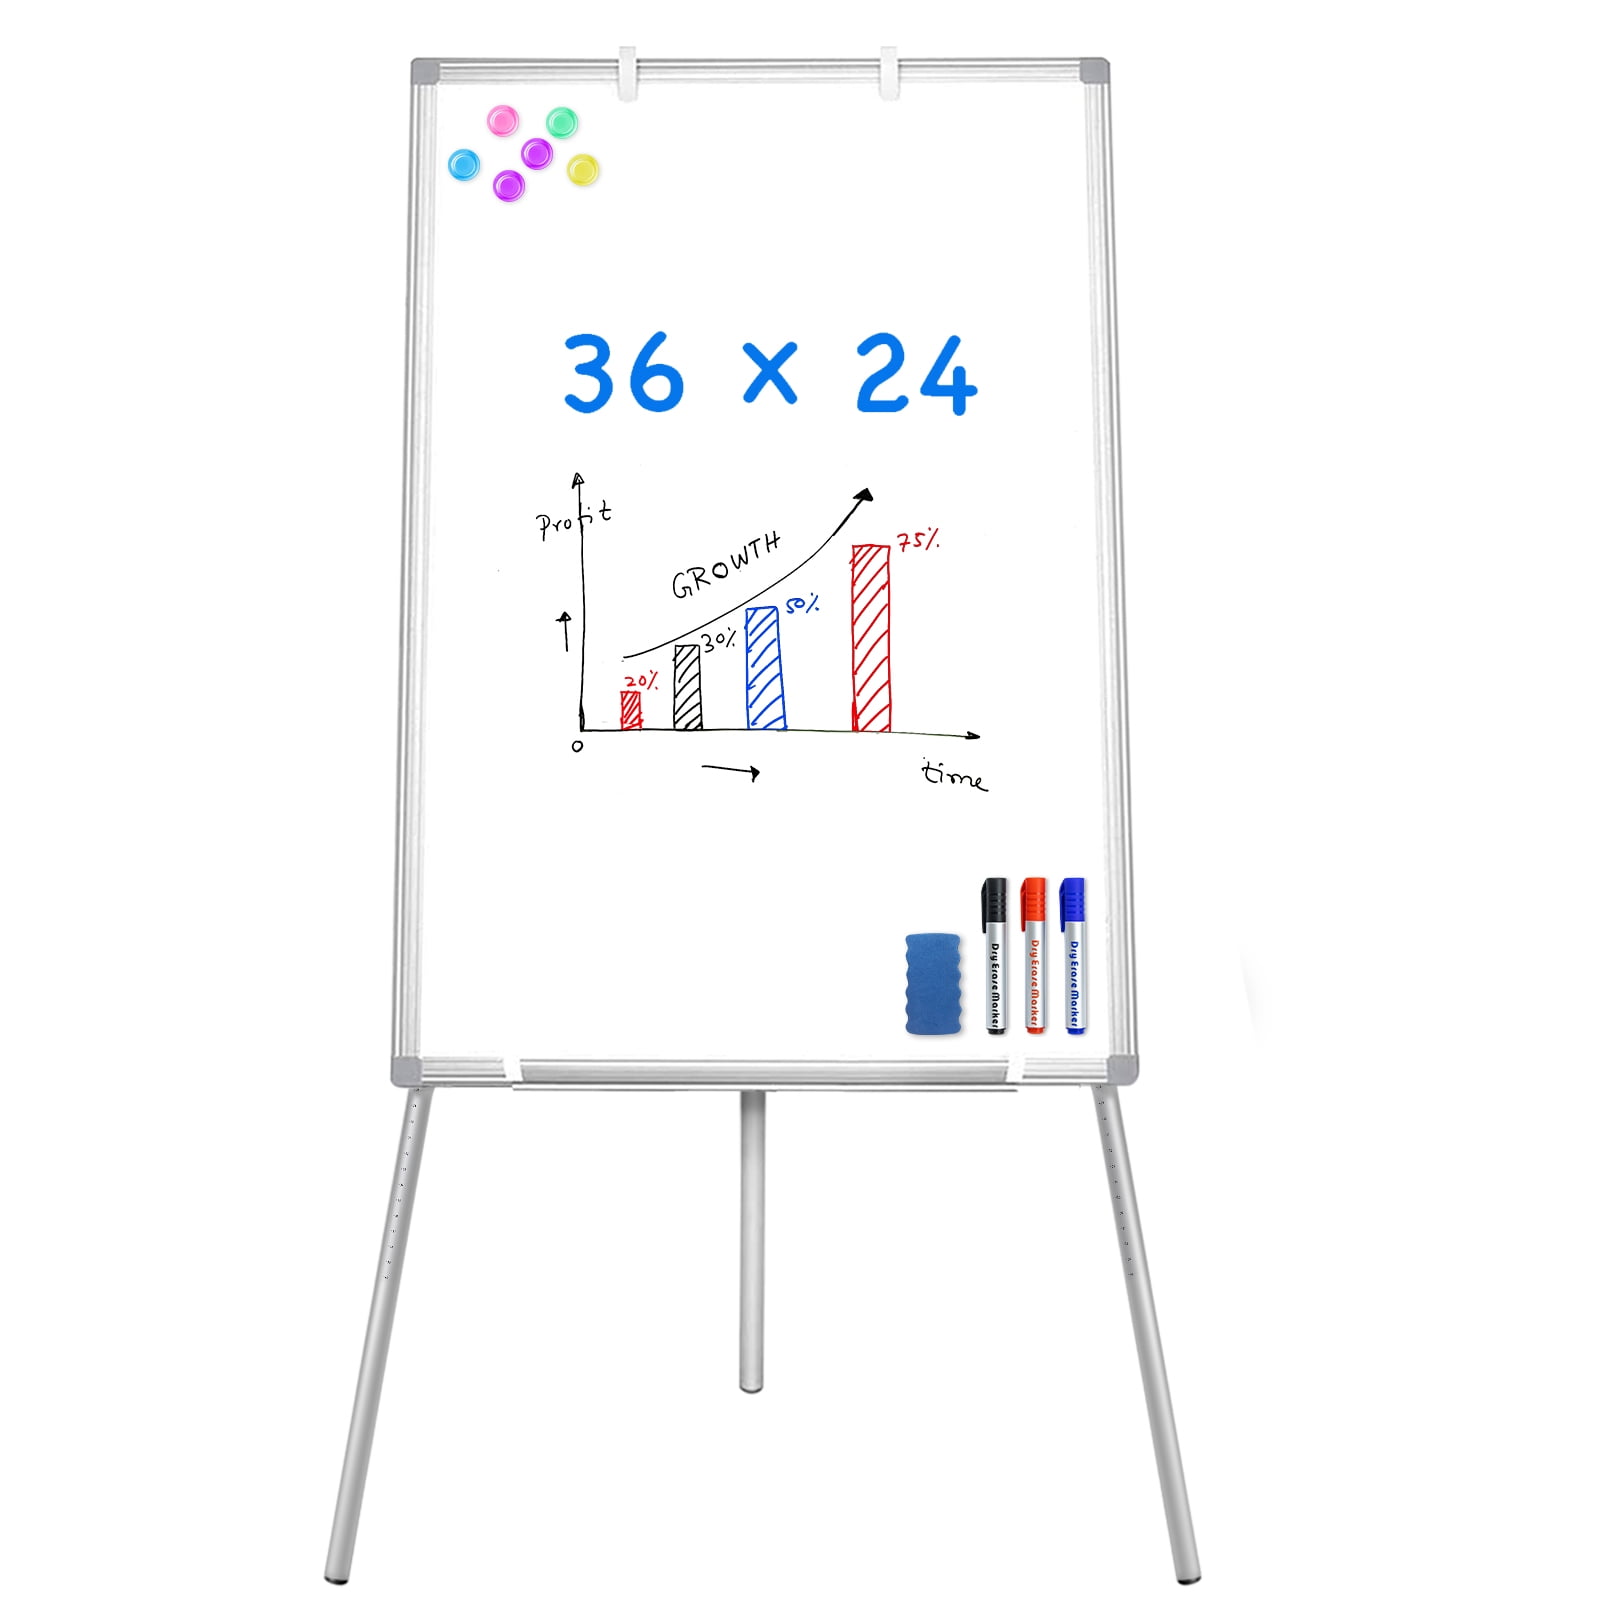 Large Magnetic Whiteboard, 72 x 40 inch Big Wall Mount White Board, Foldable Dry Erase Board with 1 Eraser 3 Markers and 6 Magnets, Aluminum Frame